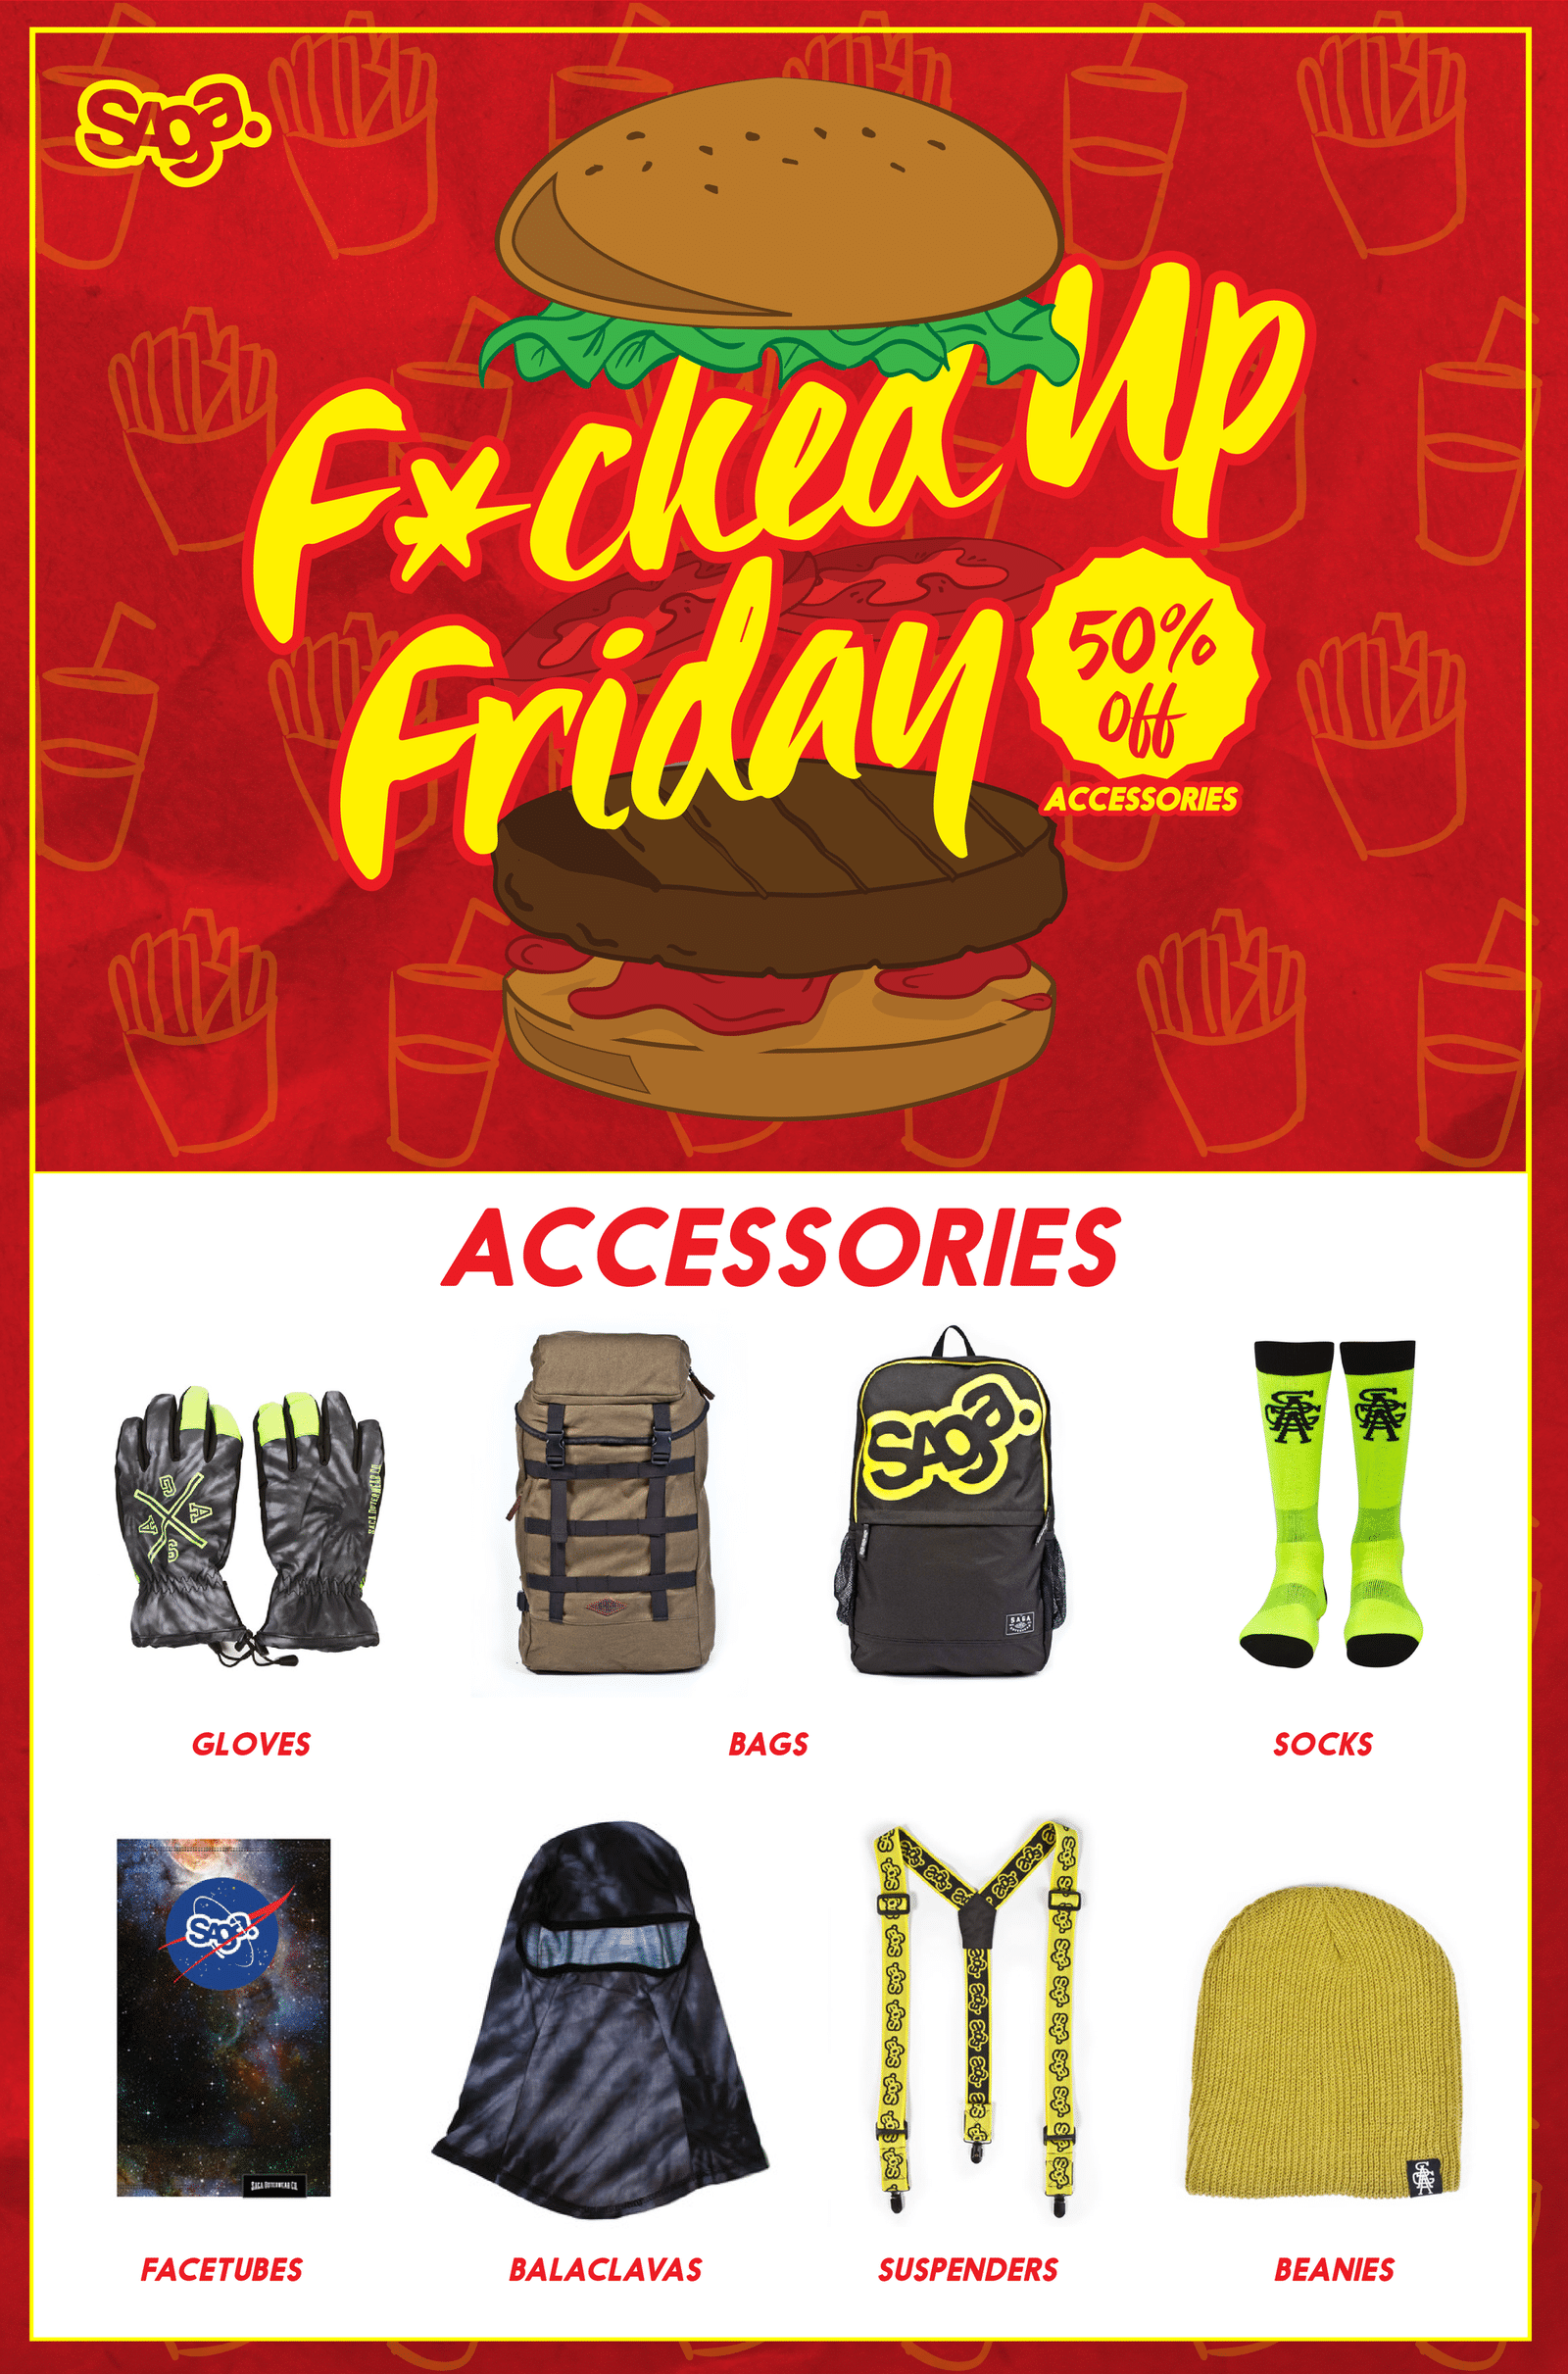 F*cked Up Friday: Accessories